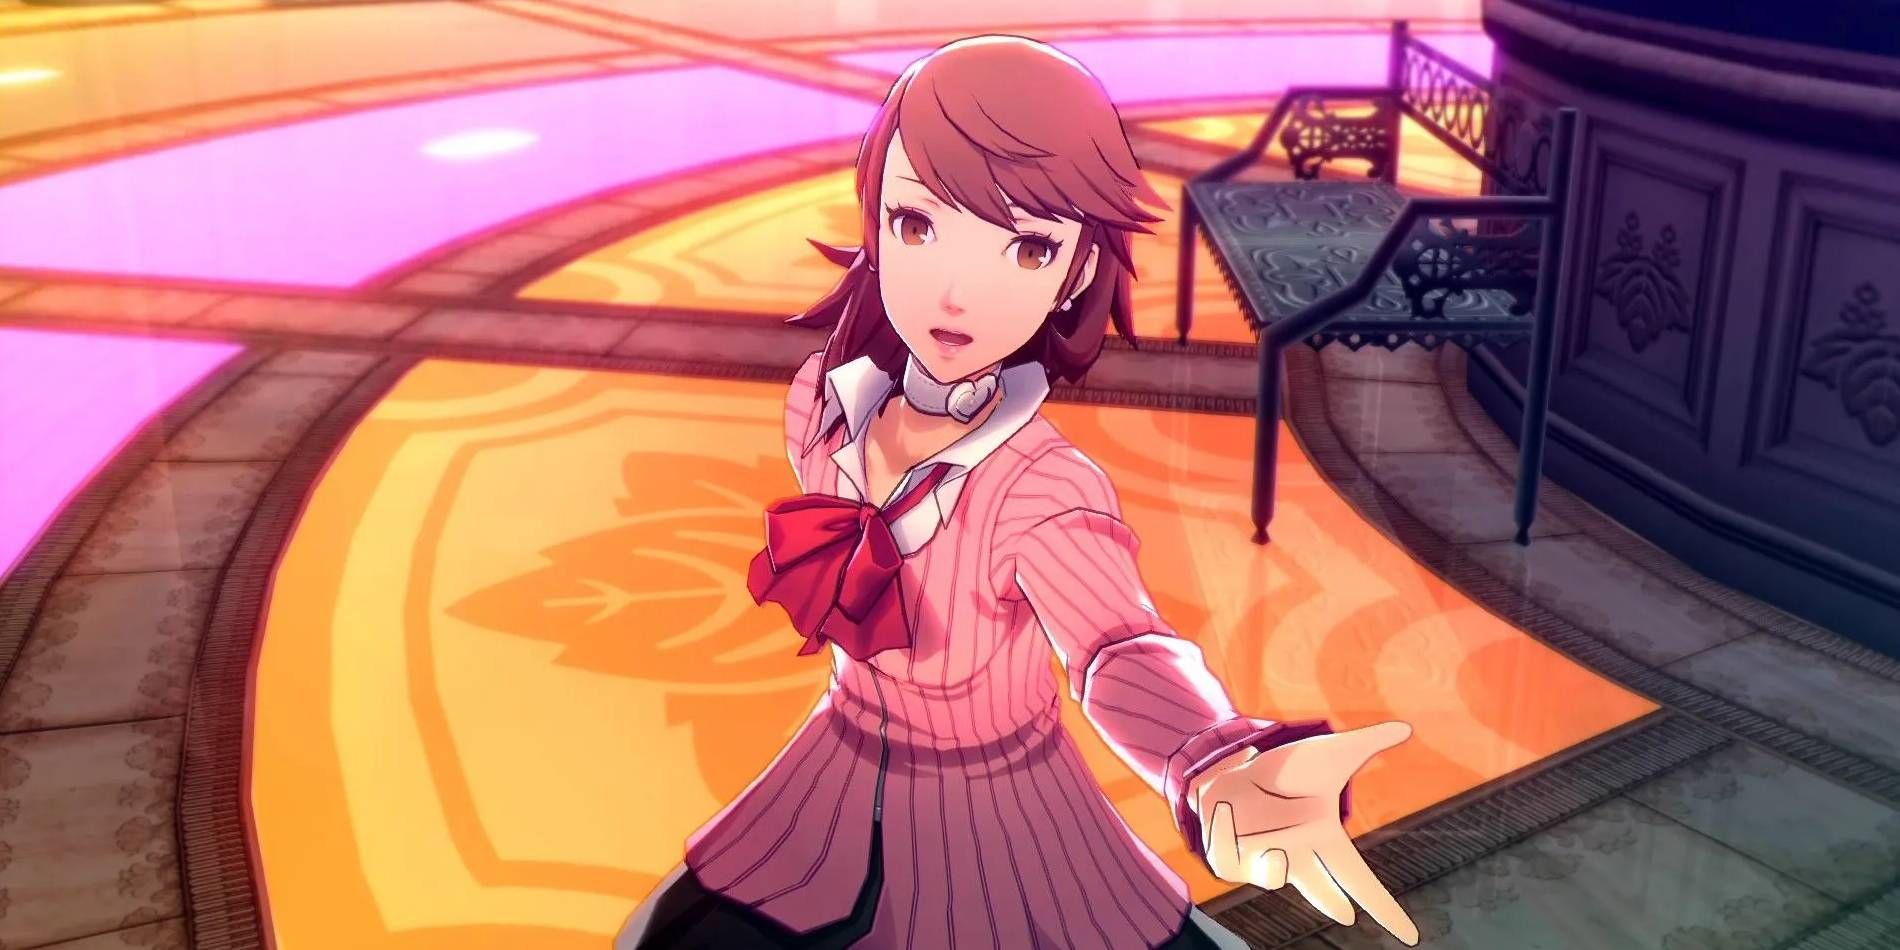 Persona 3's Yukari Takeba dancing with her arm outstretched and looking toward the camera.